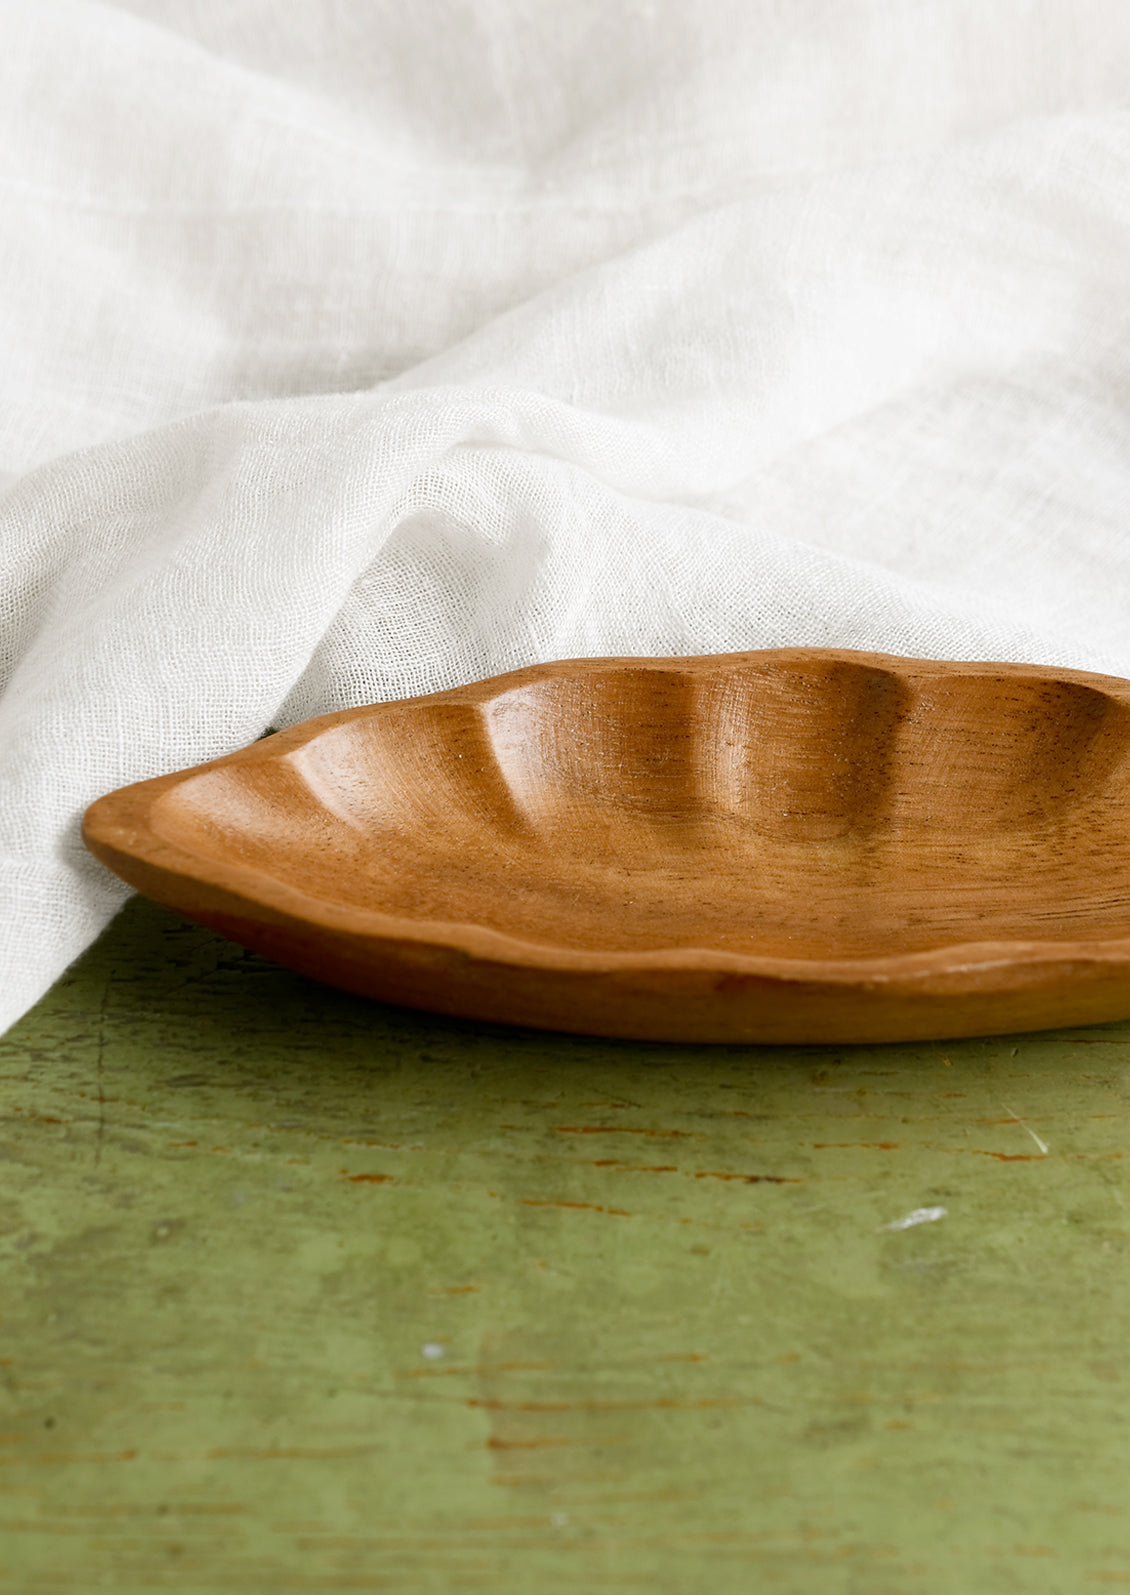 An elongated diamond or "seed pod" shaped wooden dish.